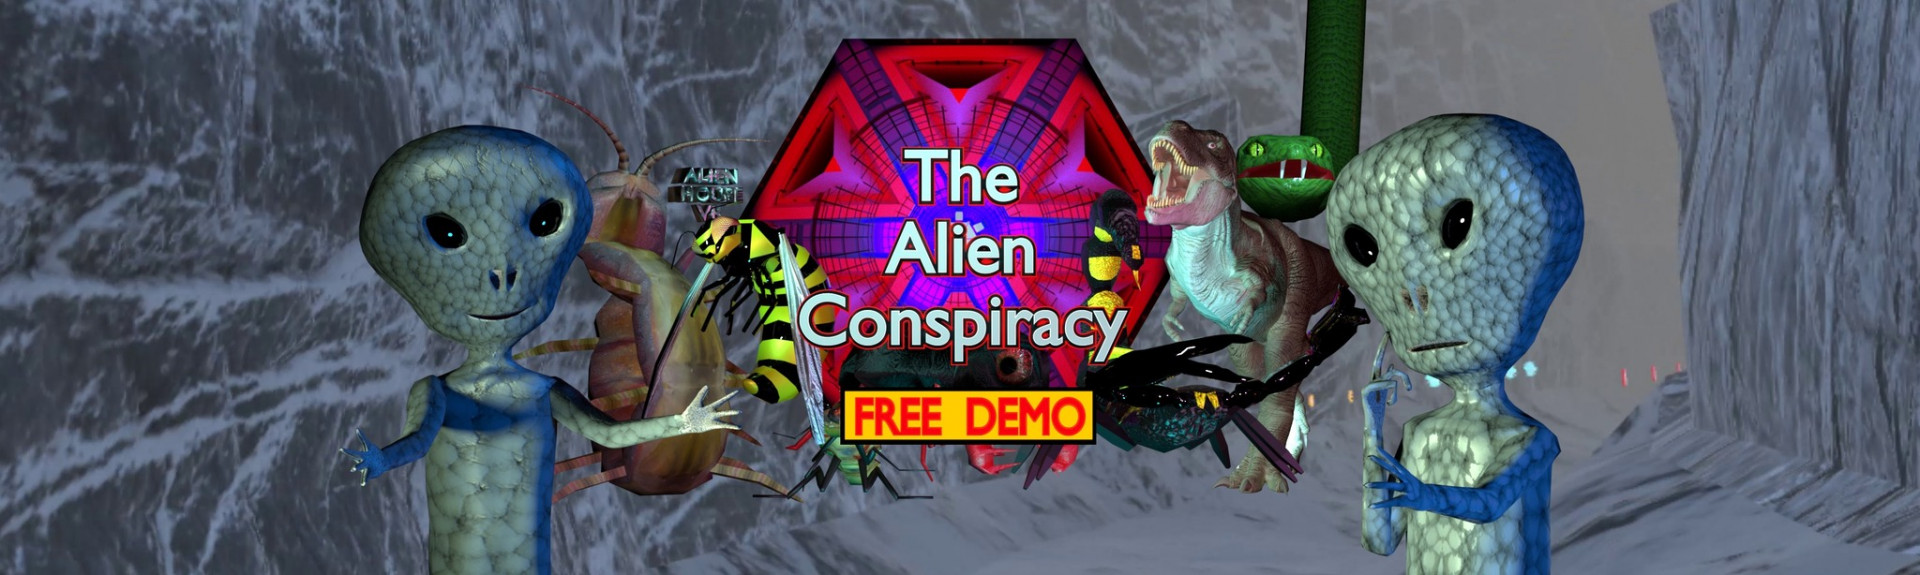 The Alien Conspiracy Free Demo